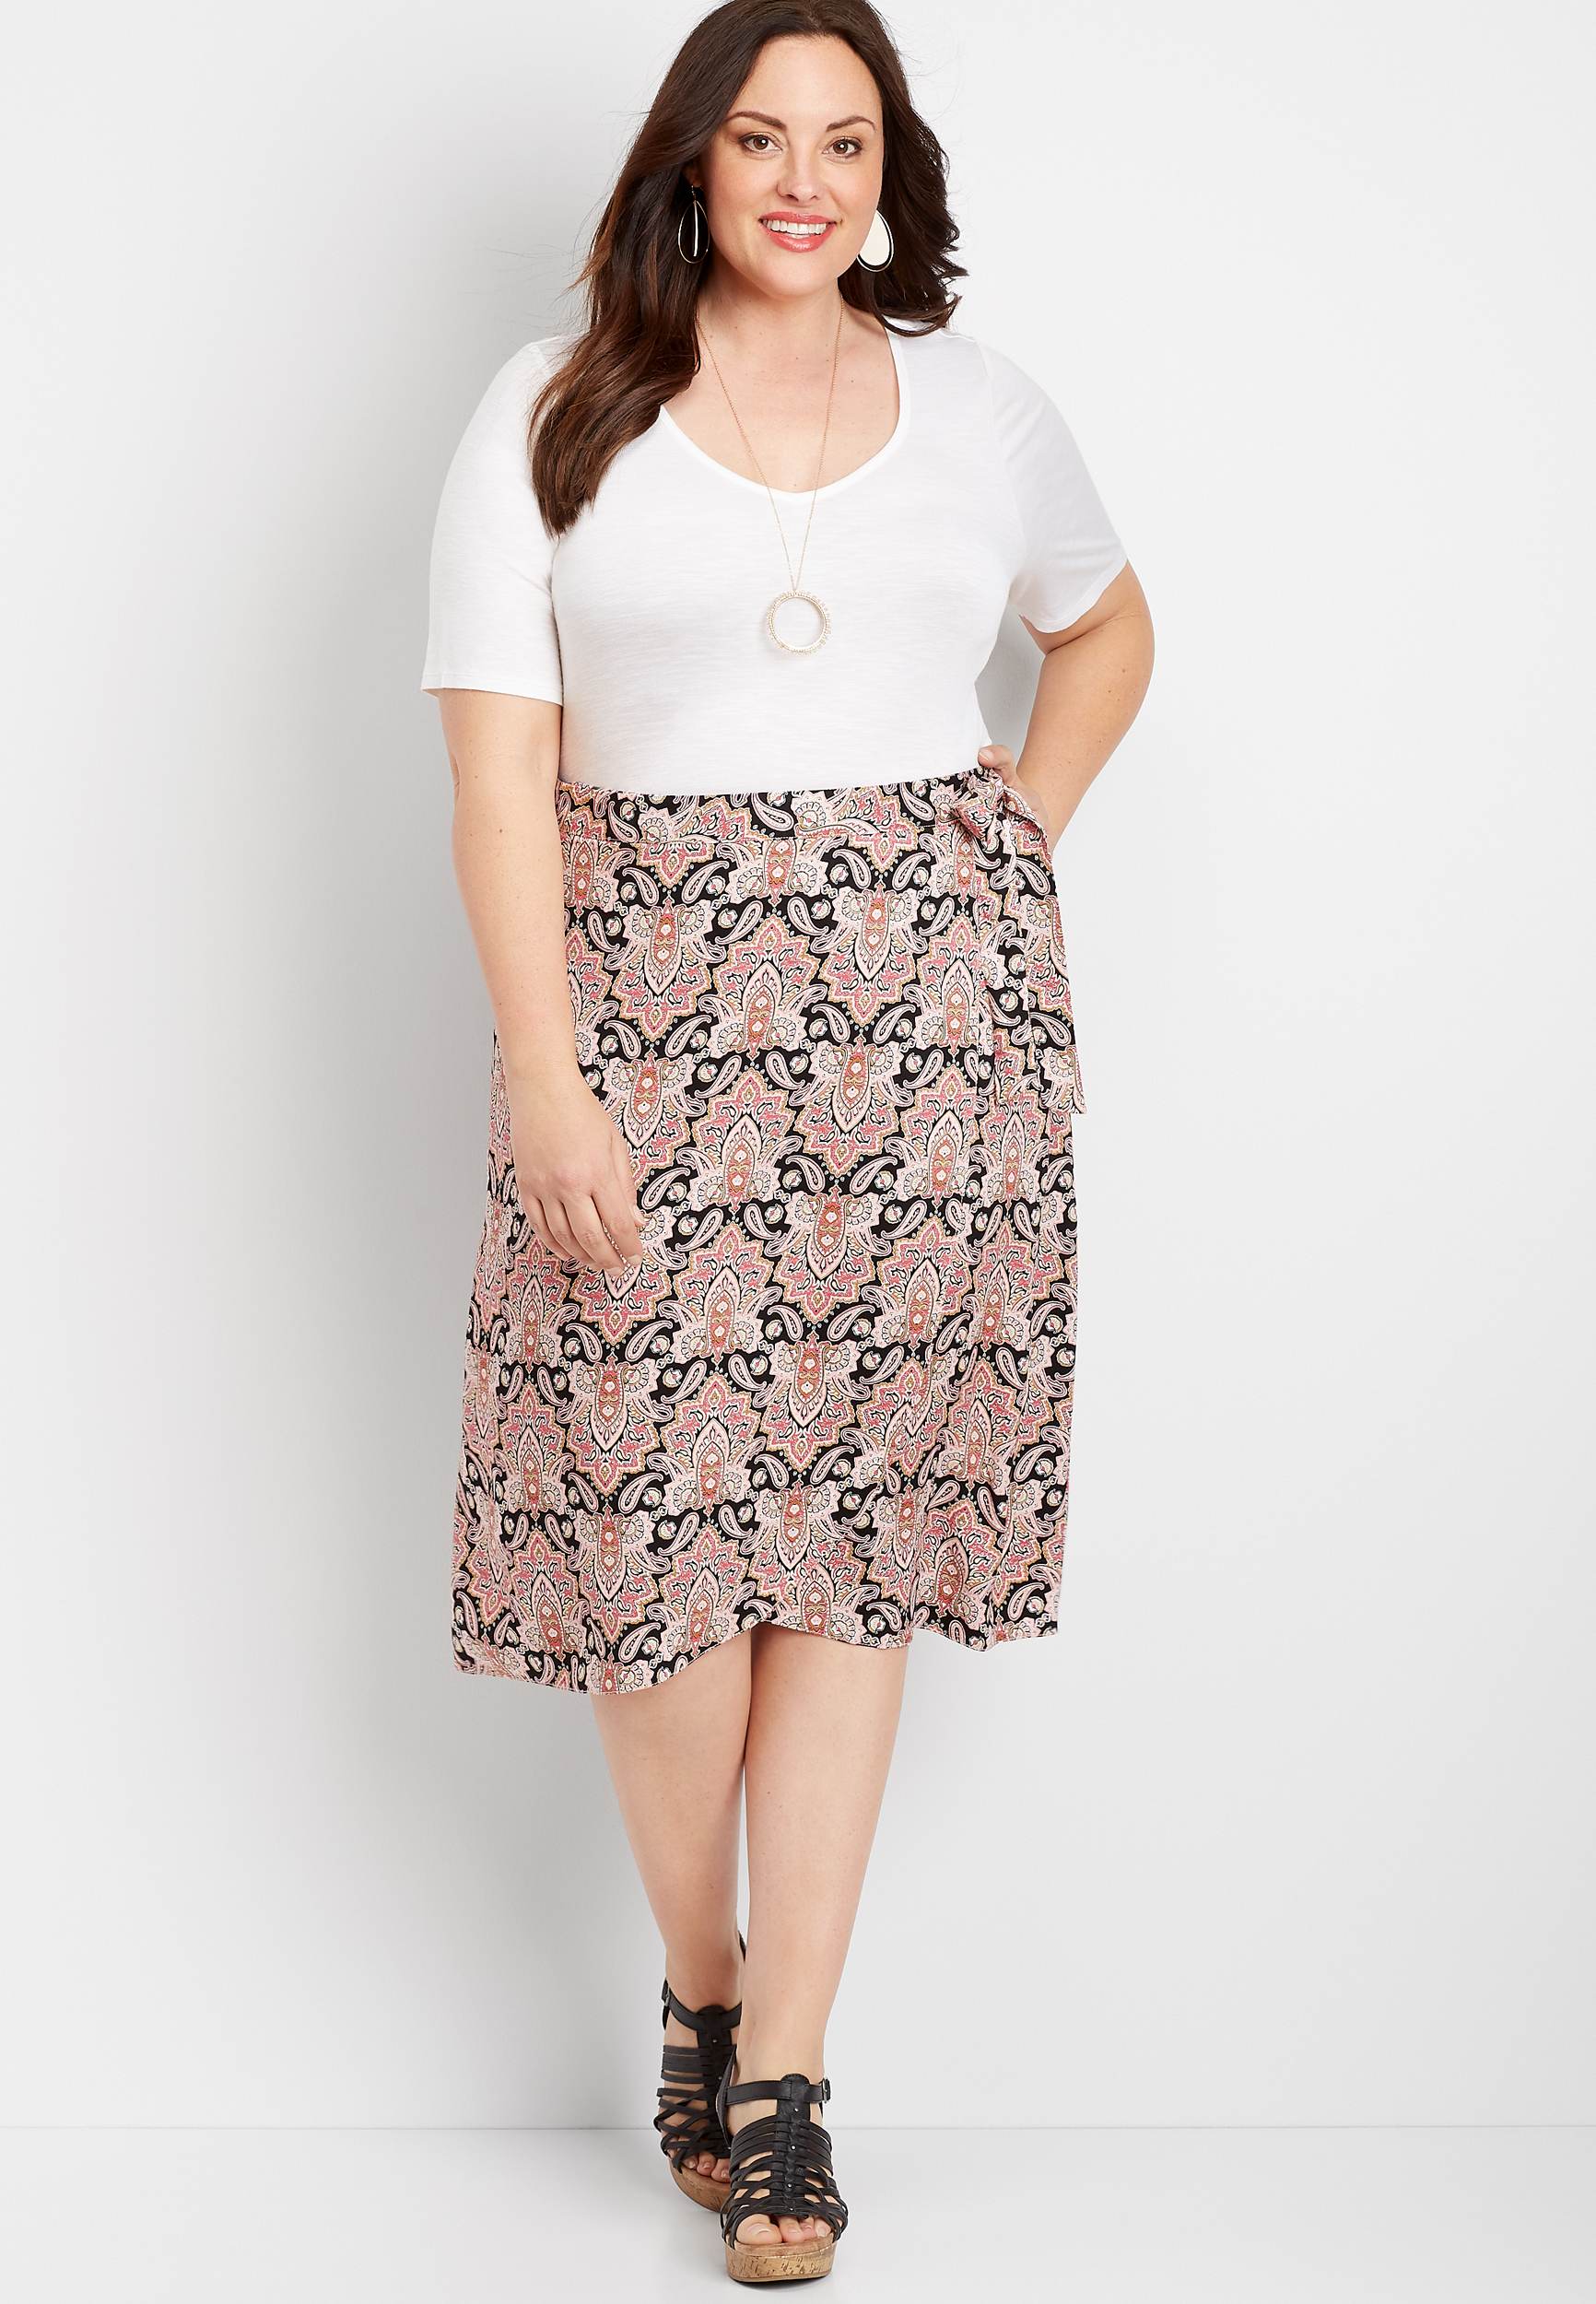 Plus Size Skirts | maurices